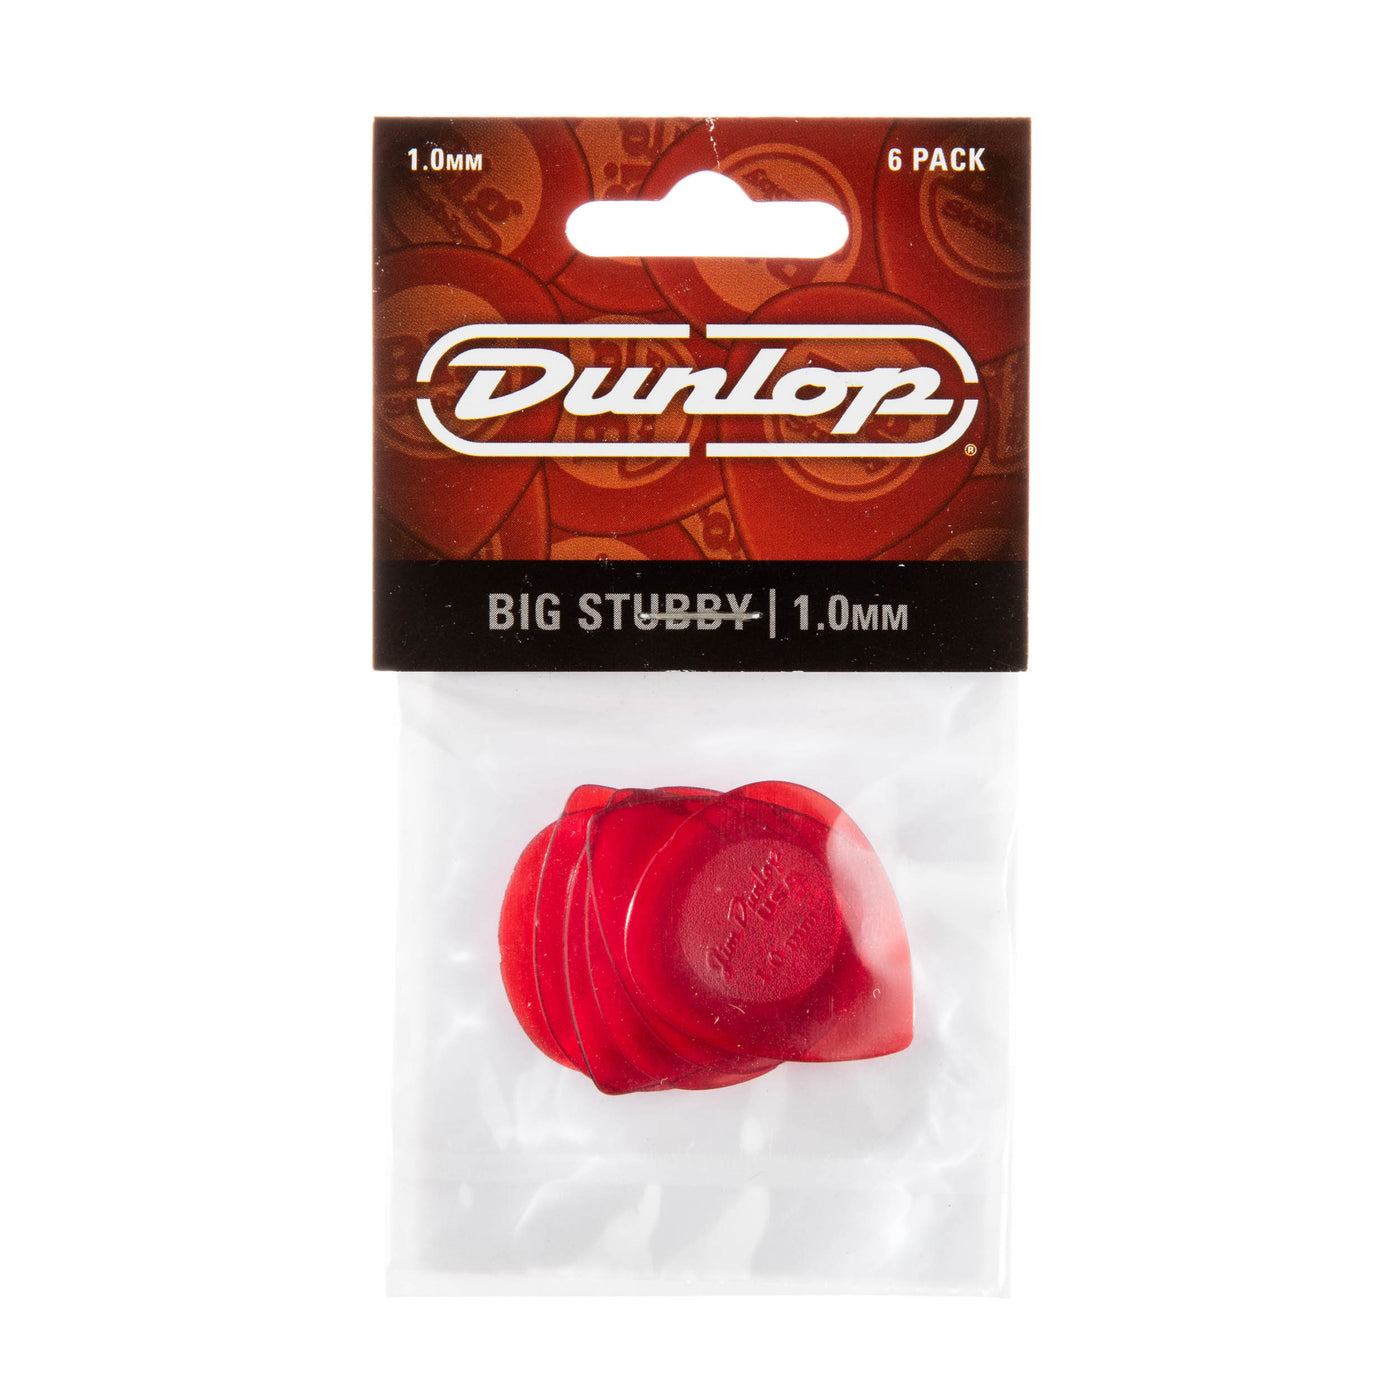 Big Stubby 1.00mm Pick, Red - 6 Pack